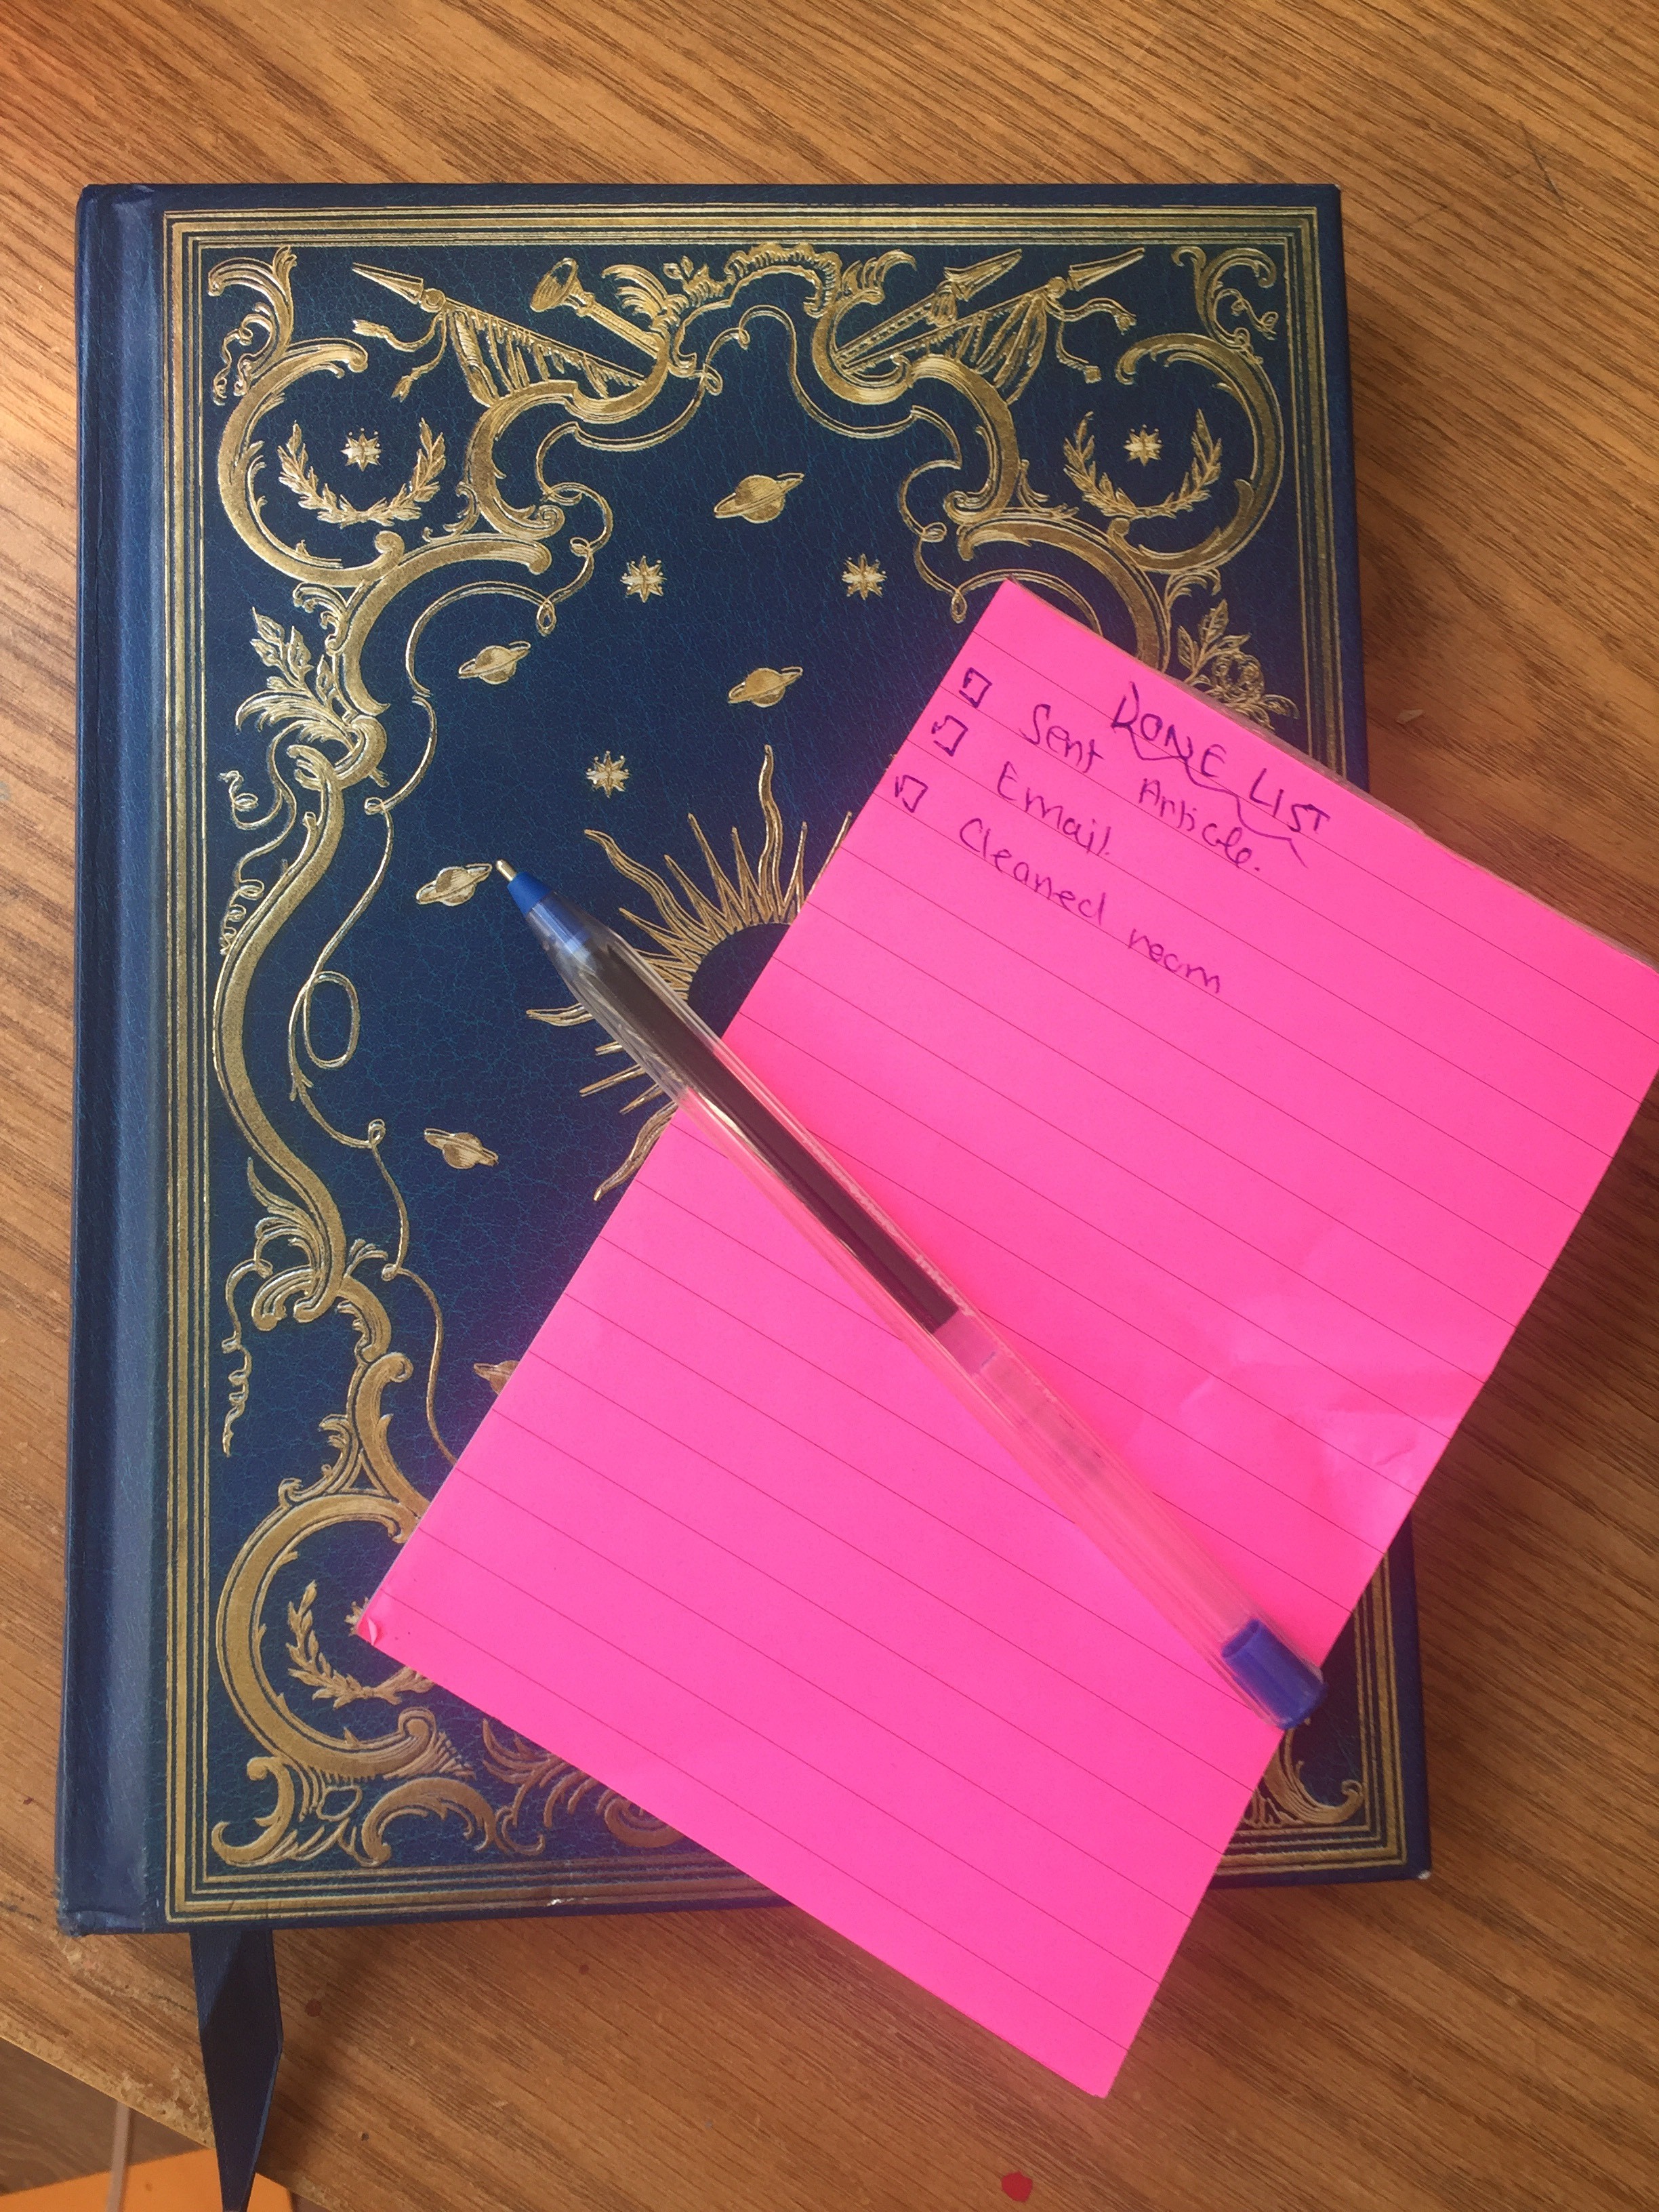 A picture of a note book and list of completed tasks.